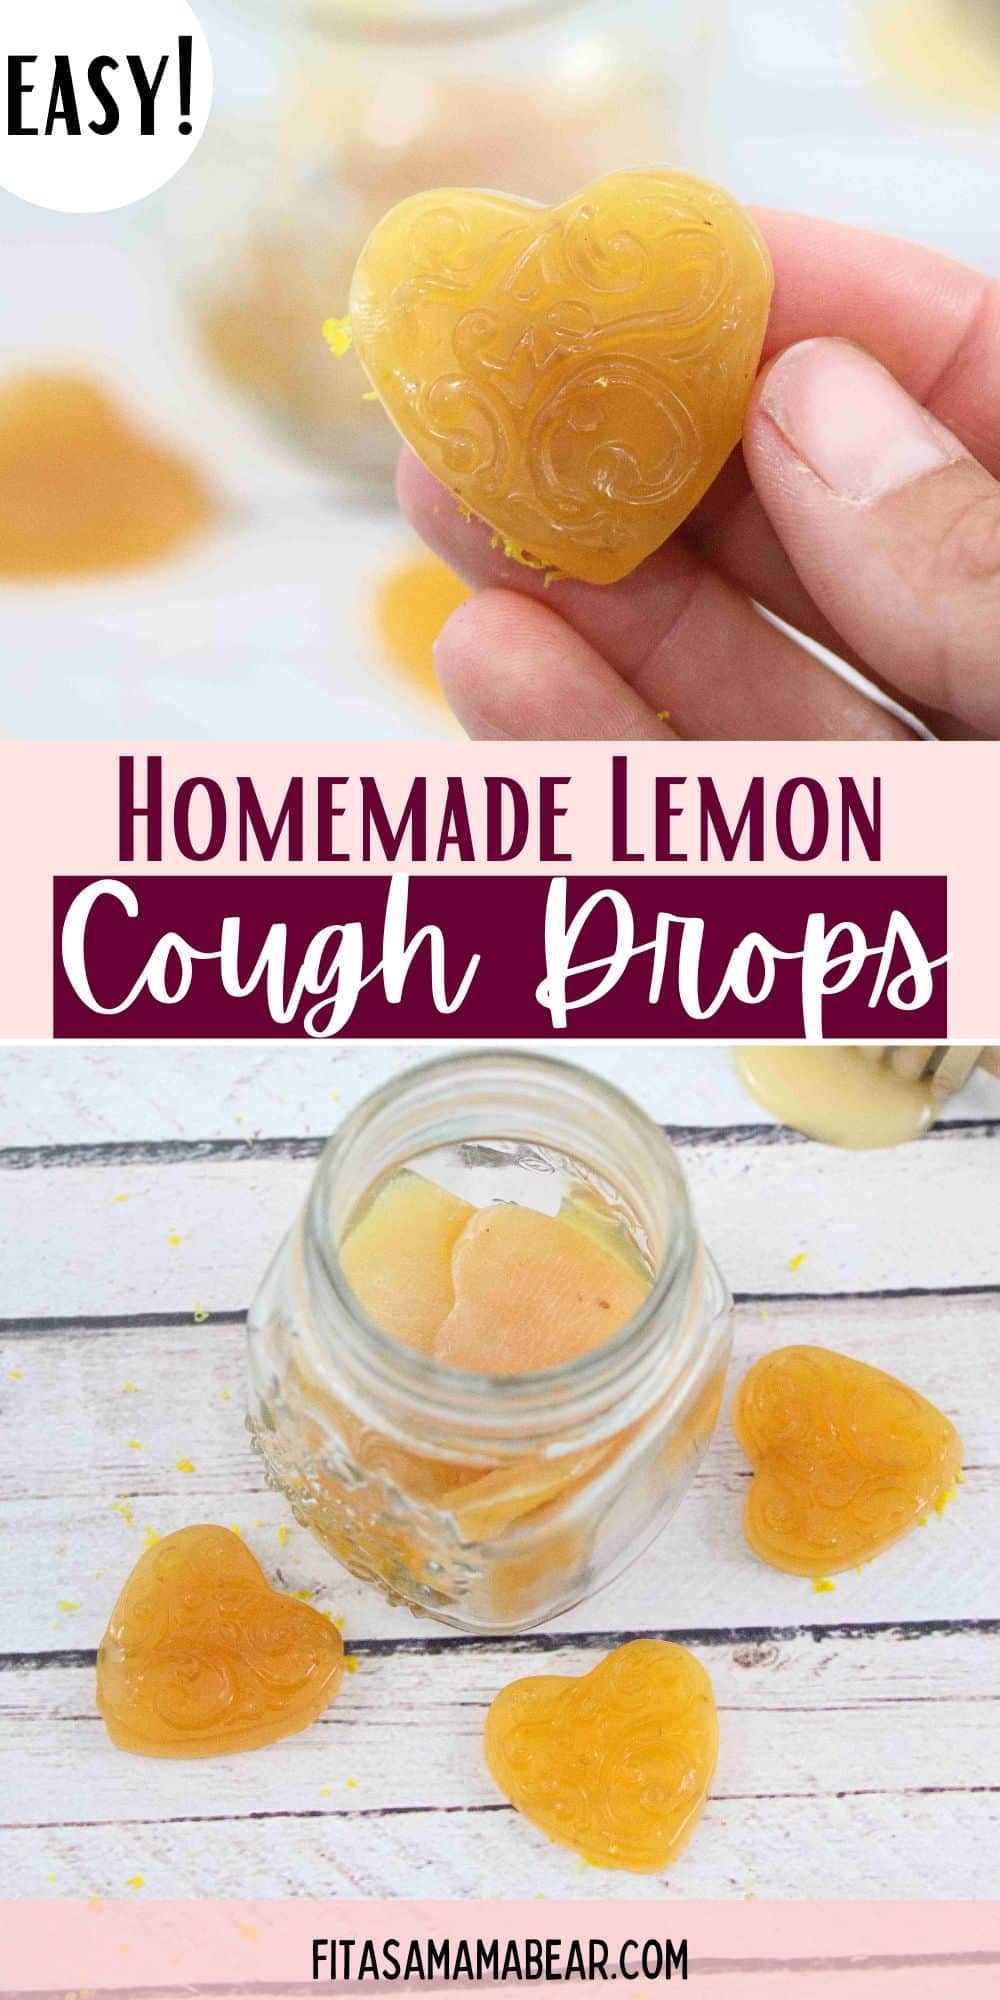 Pin image with text: top image a close up of a hand holding a homemade cough drop and the bottom of the heart shaped, lemon honey cough drops around a ja full